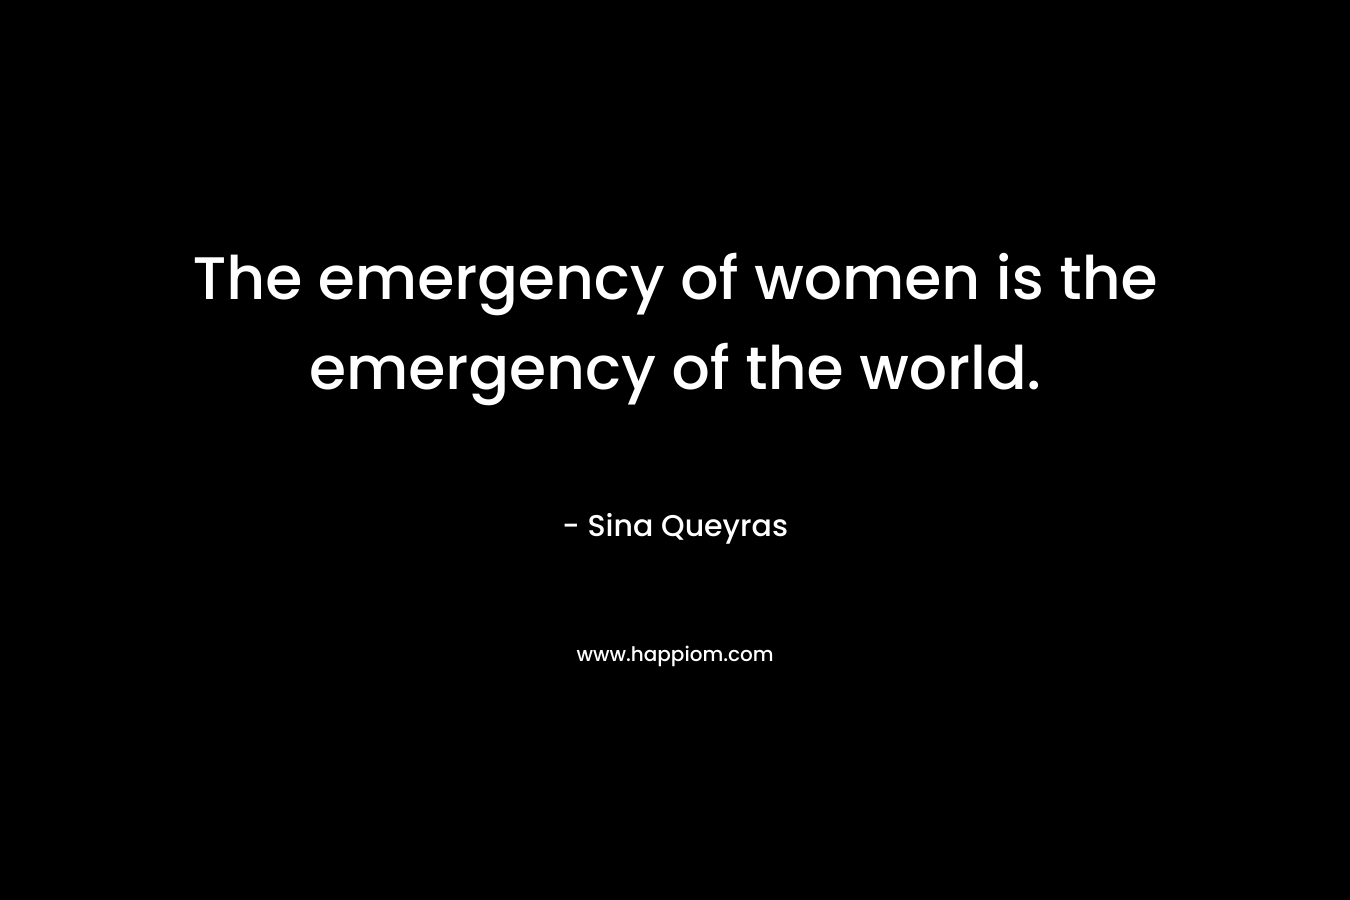 The emergency of women is the emergency of the world.